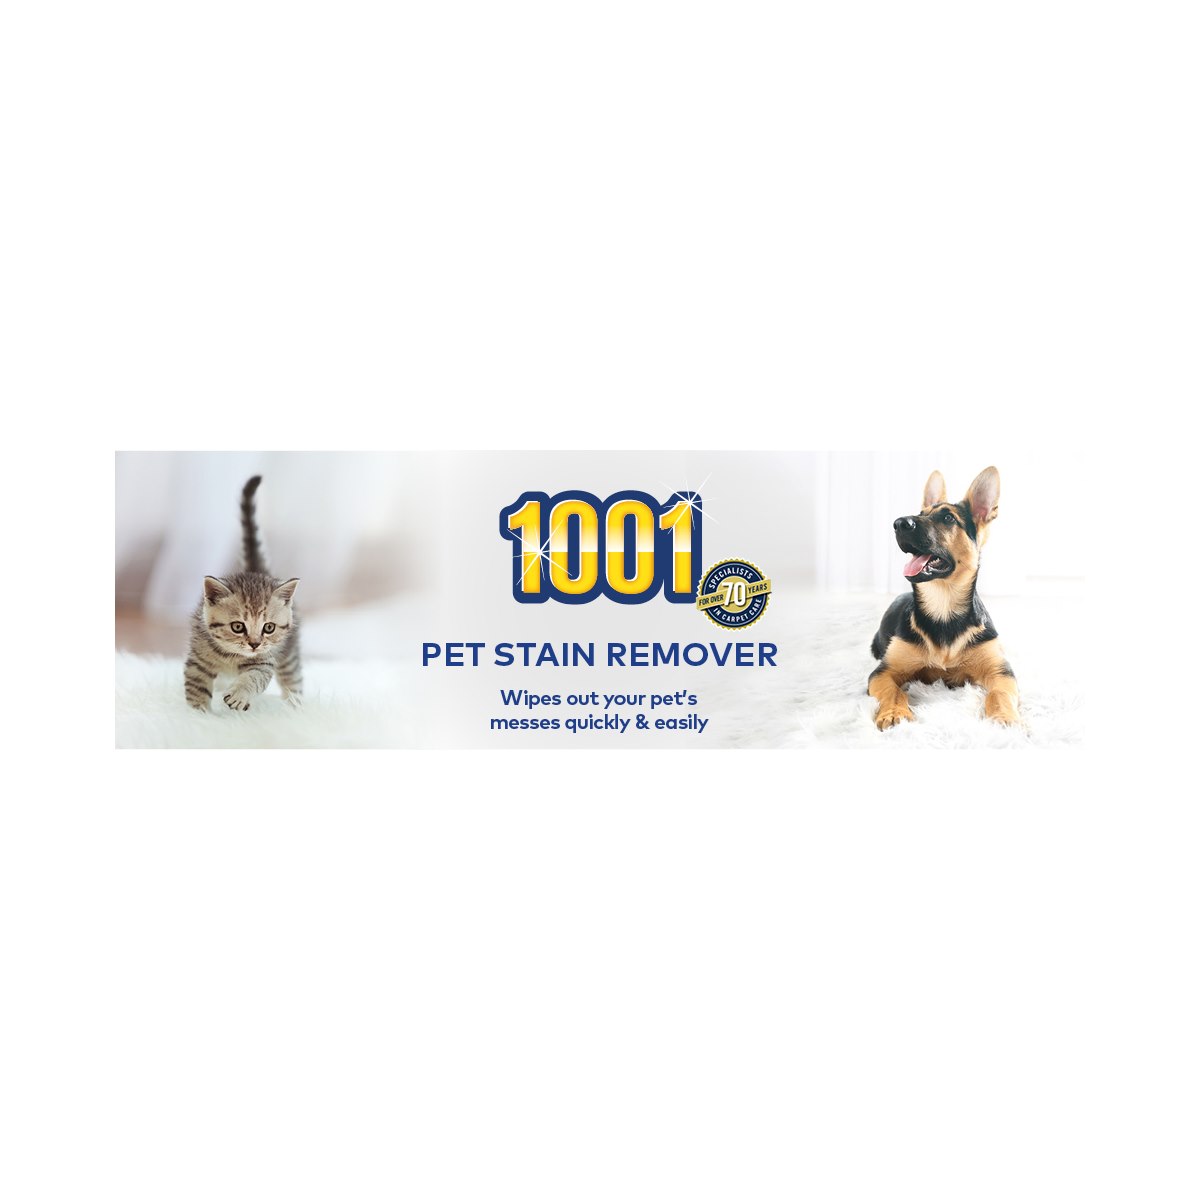 Where to Buy 1001 Pet Stain Remover Spray